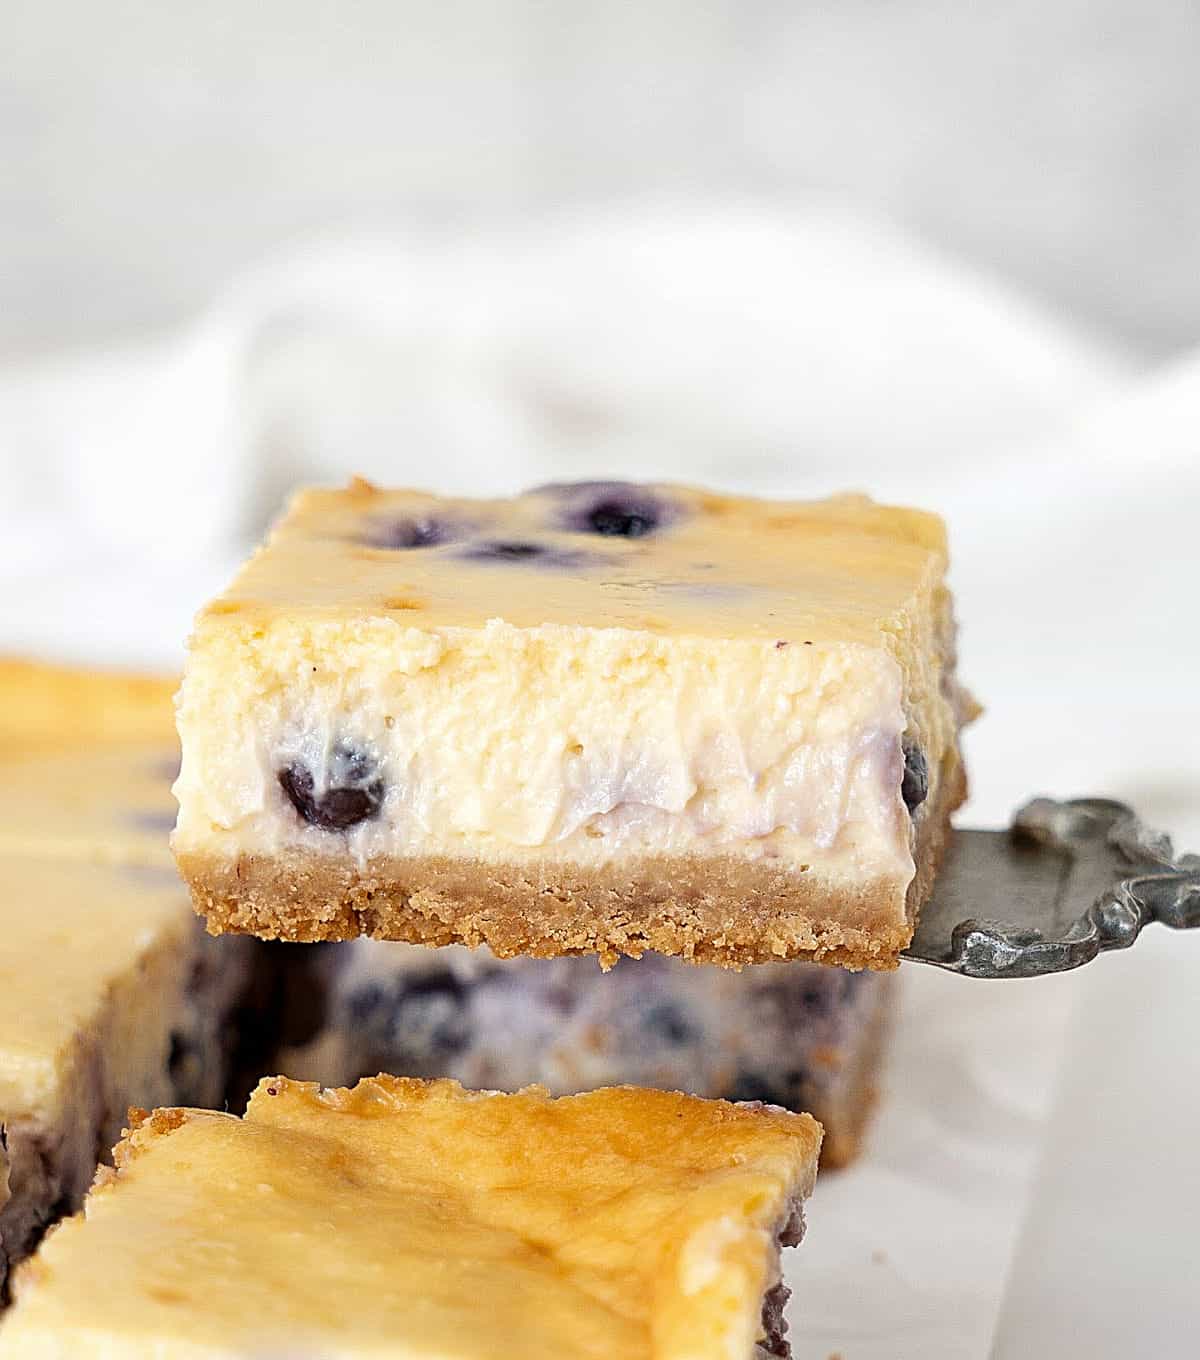 Lifting a square of blueberry cheesecake bars with a vintage server. White and light grey background.